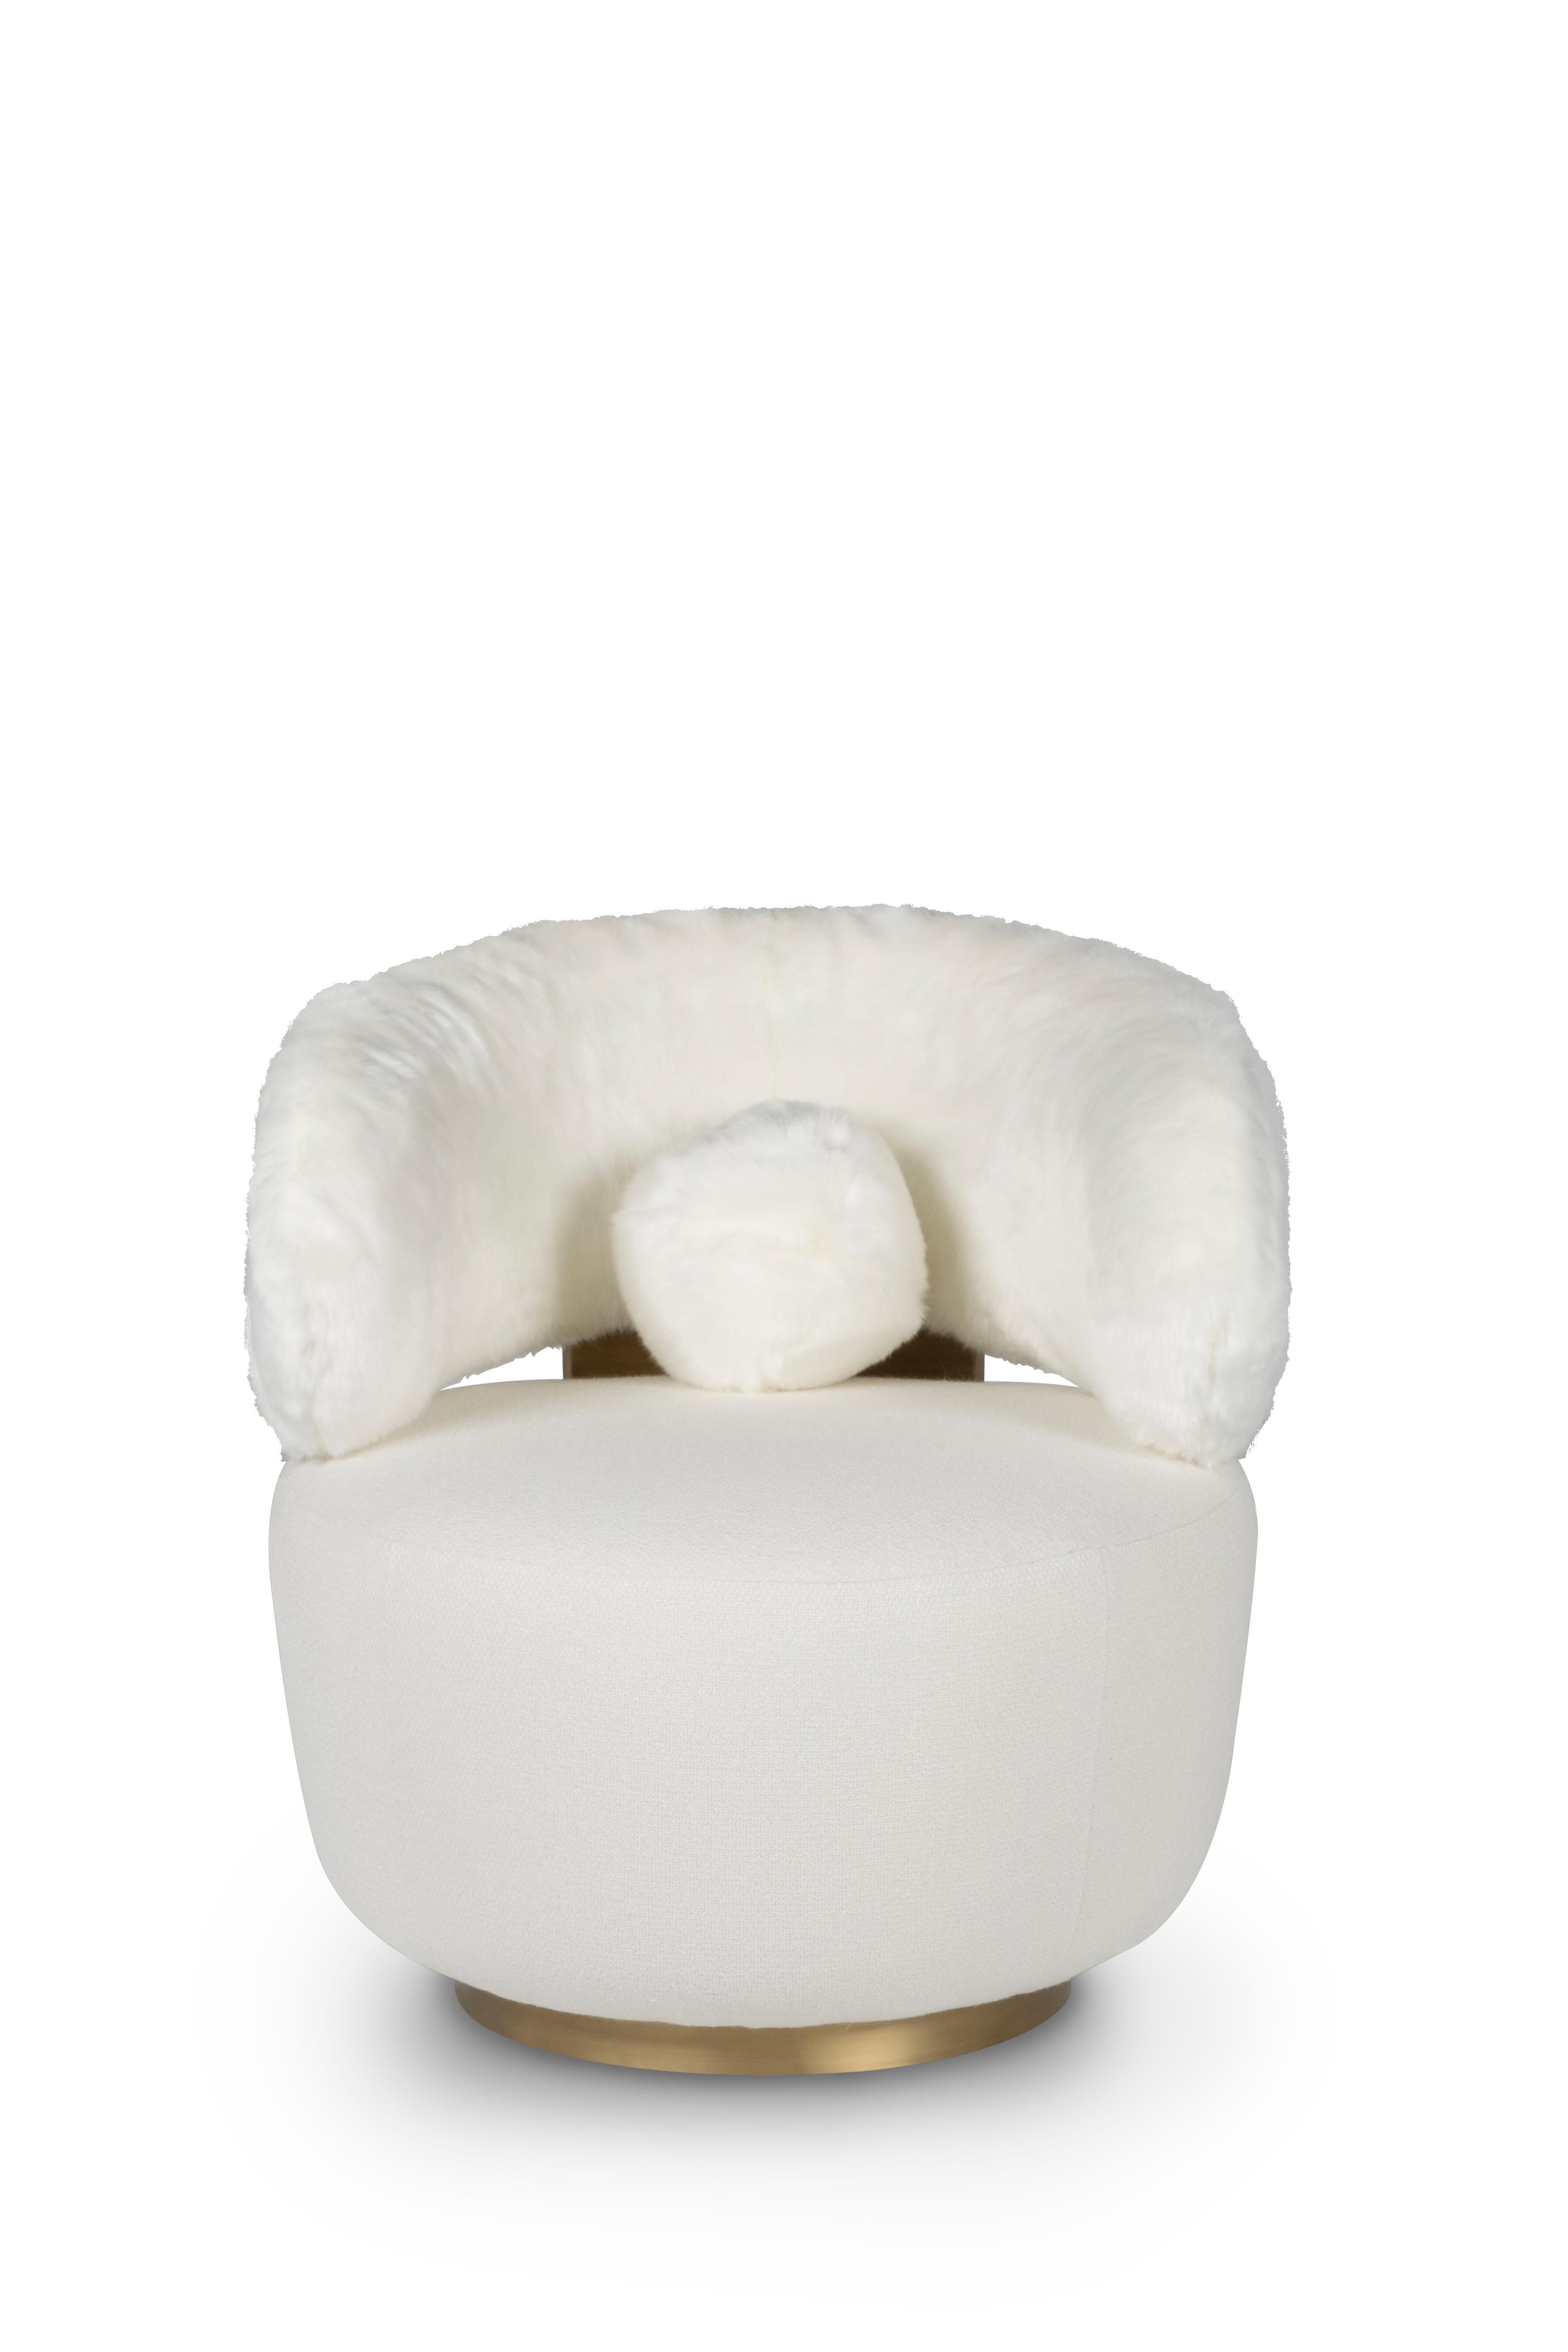 Caju Swivel Lounge Chair, Contemporary Collection, Handcrafted in Portugal - Europe by Greenapple.

The Caju lounge chair stands as a trendy furniture piece that personifies the organic shape of a cashew. Upholstered in faux fur and Albatre